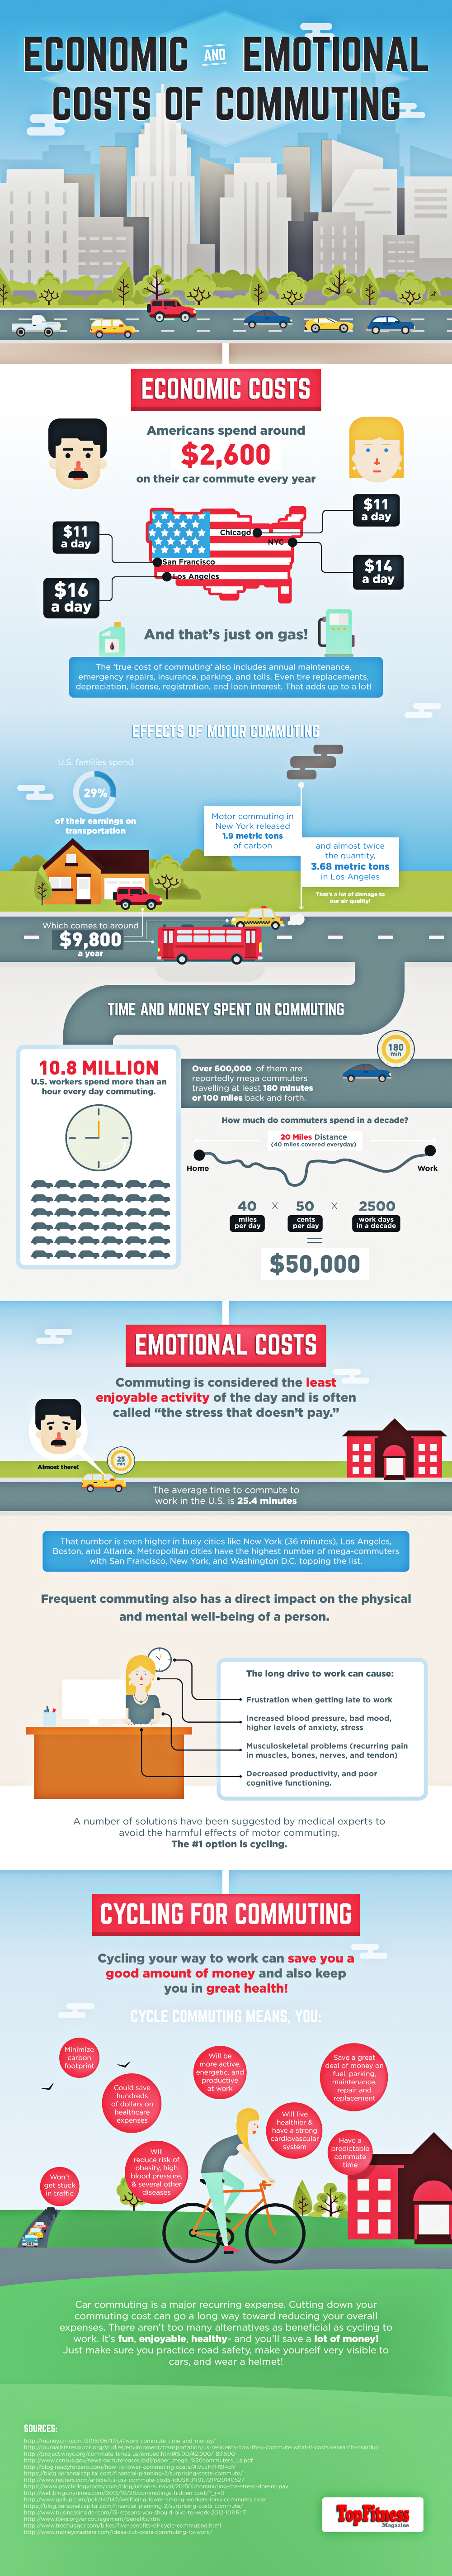 Infographic: The Costs Of Commuting